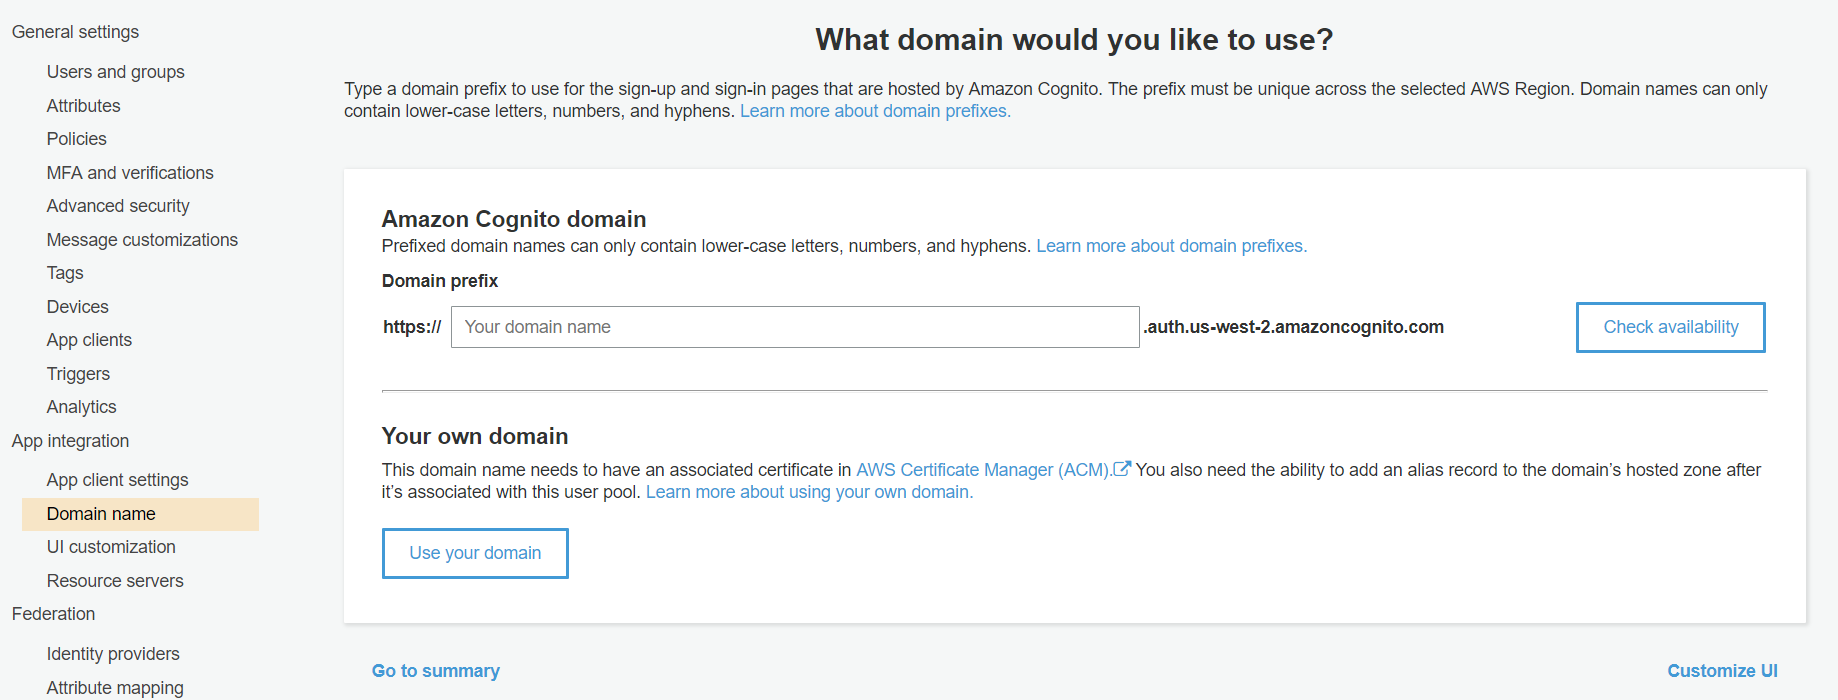 OAuth/OpenID/OIDC Single Sign On (SSO), AWS cognito SSO Login Add Users / Groups